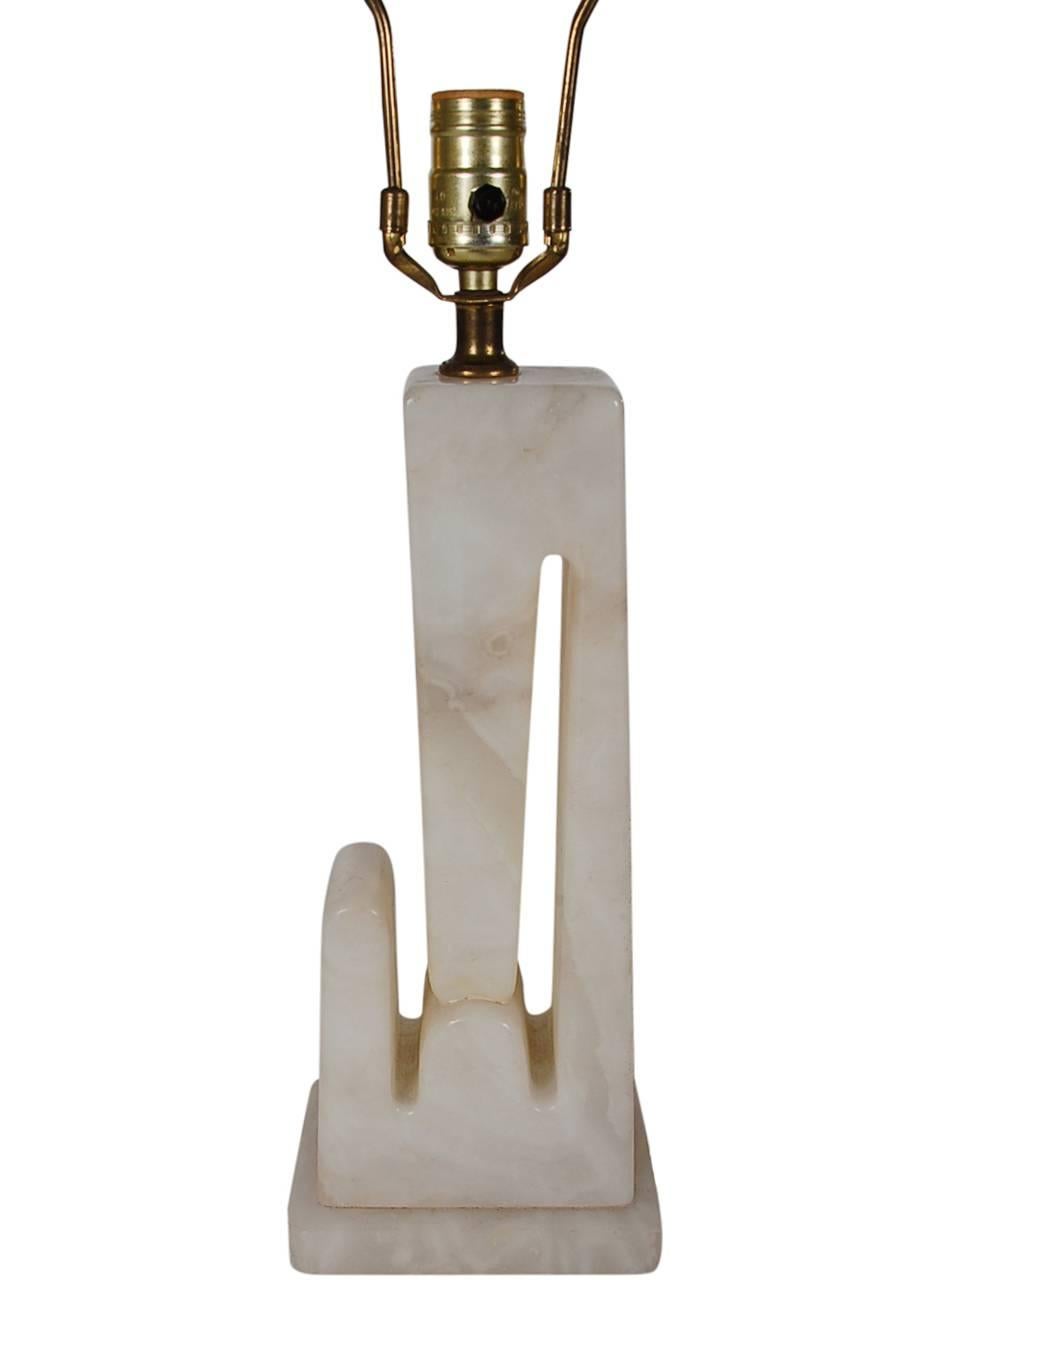 Italian Art Deco Mid-Century Modern Alabaster Marble Table Lamp from Italy